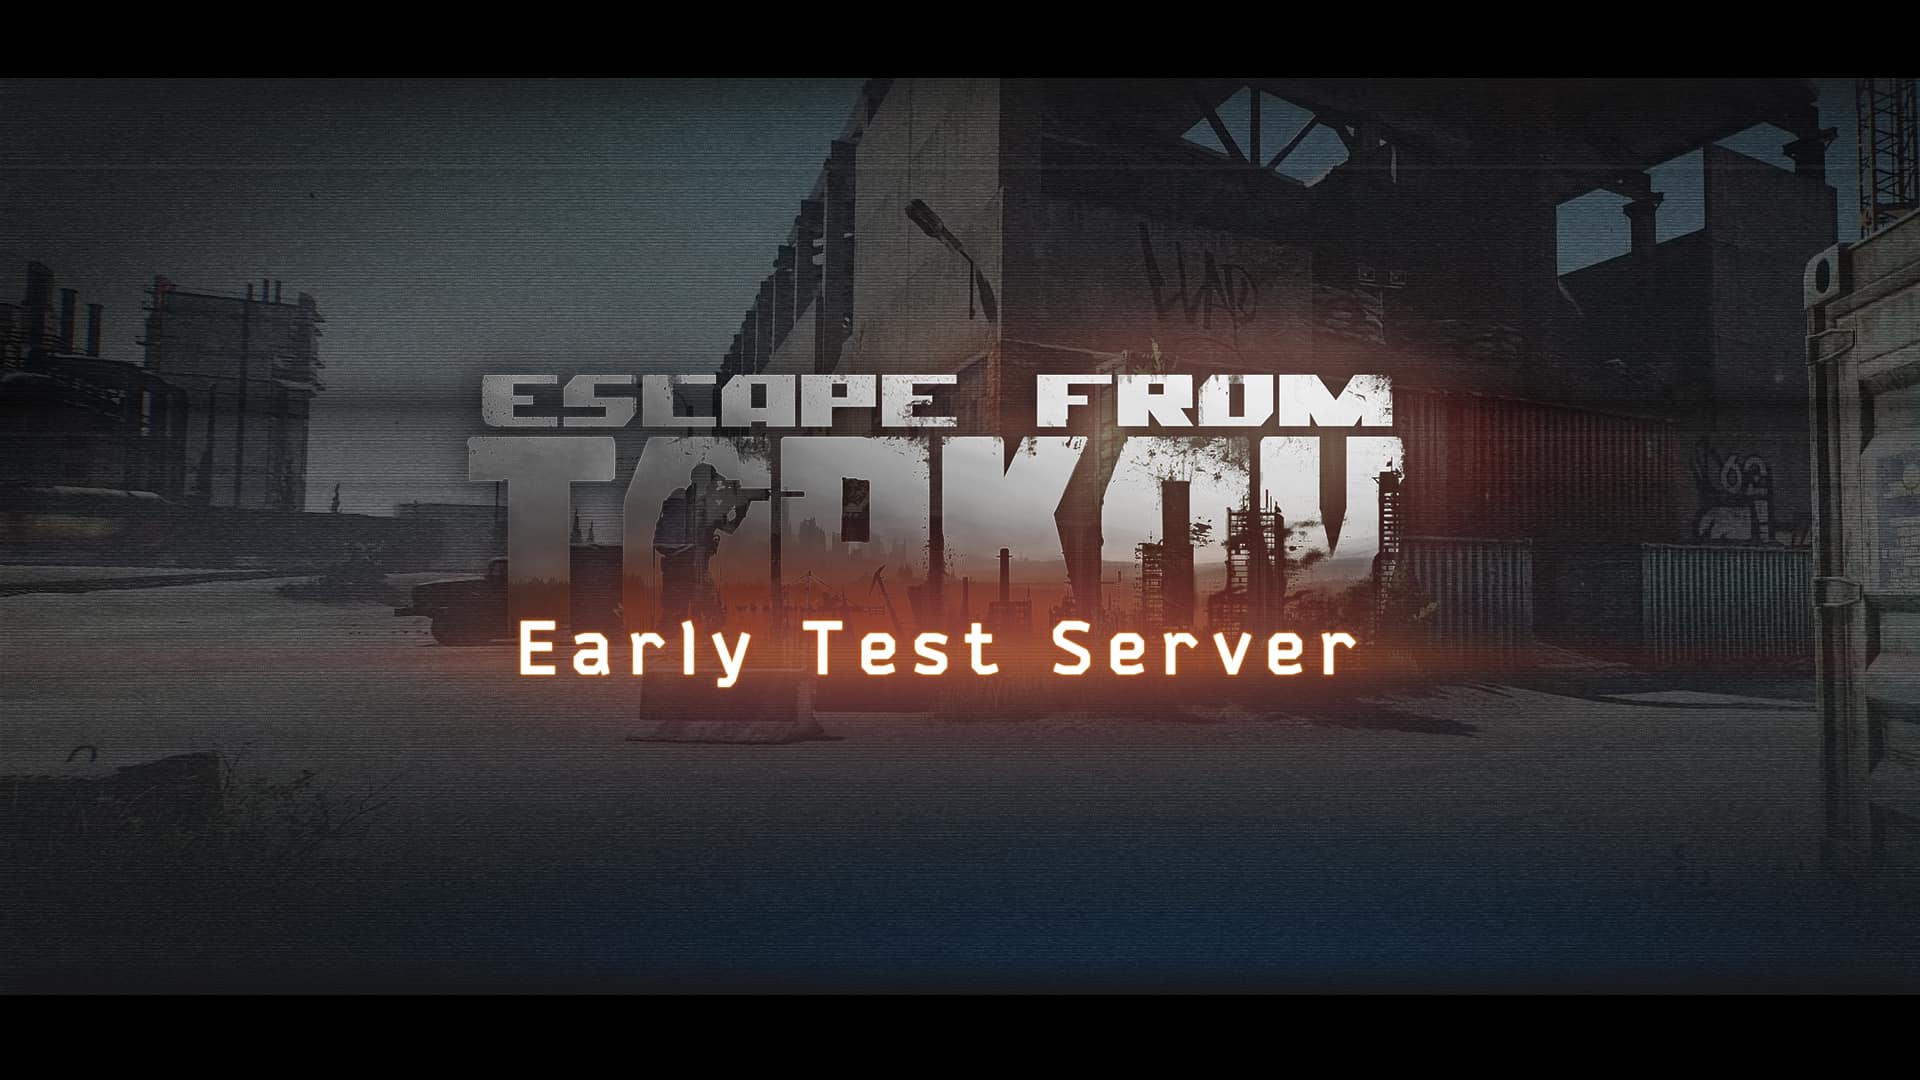 Early test server